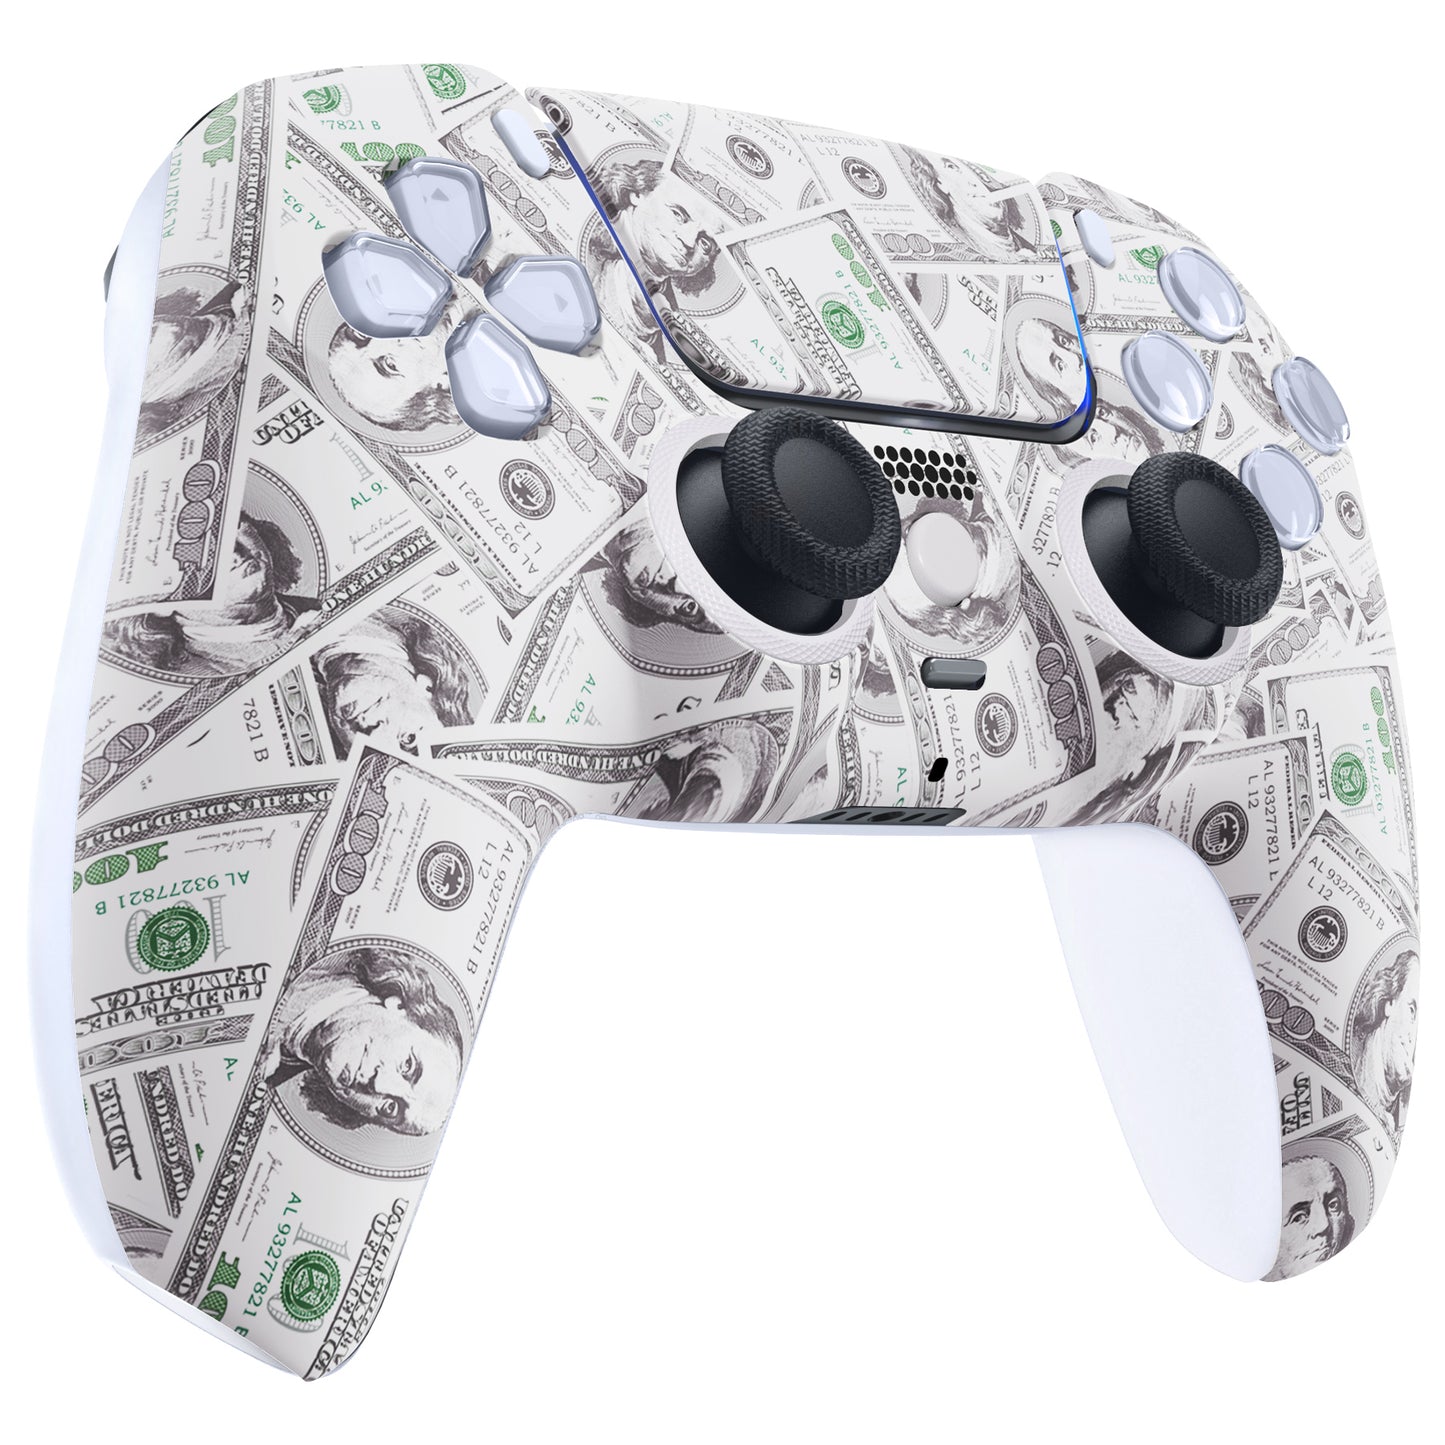 eXtremeRate LUNA Redesigned Replacement Front Shell with Touchpad Compatible with PS5 Controller BDM-010/020/030/040 - The $100 Cash Money eXtremeRate